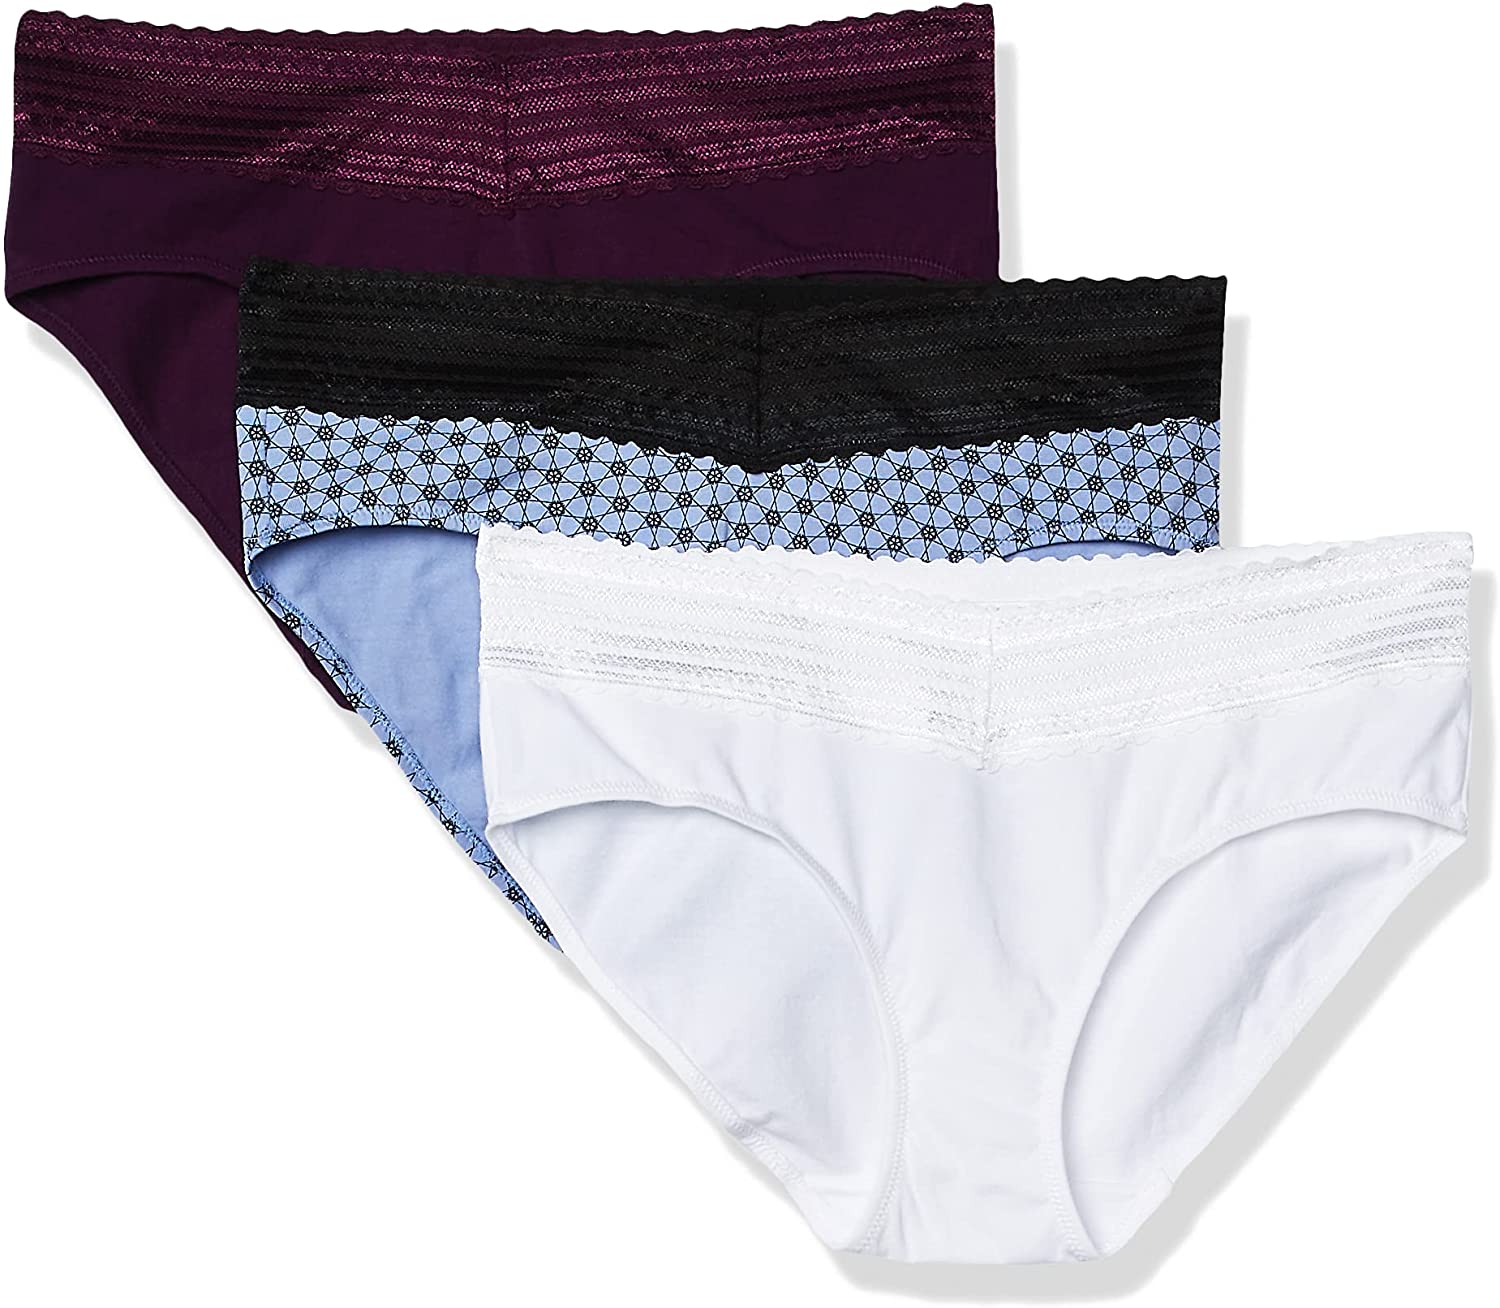 Blissful Benefits by Warner Brief Panties and 33 similar items